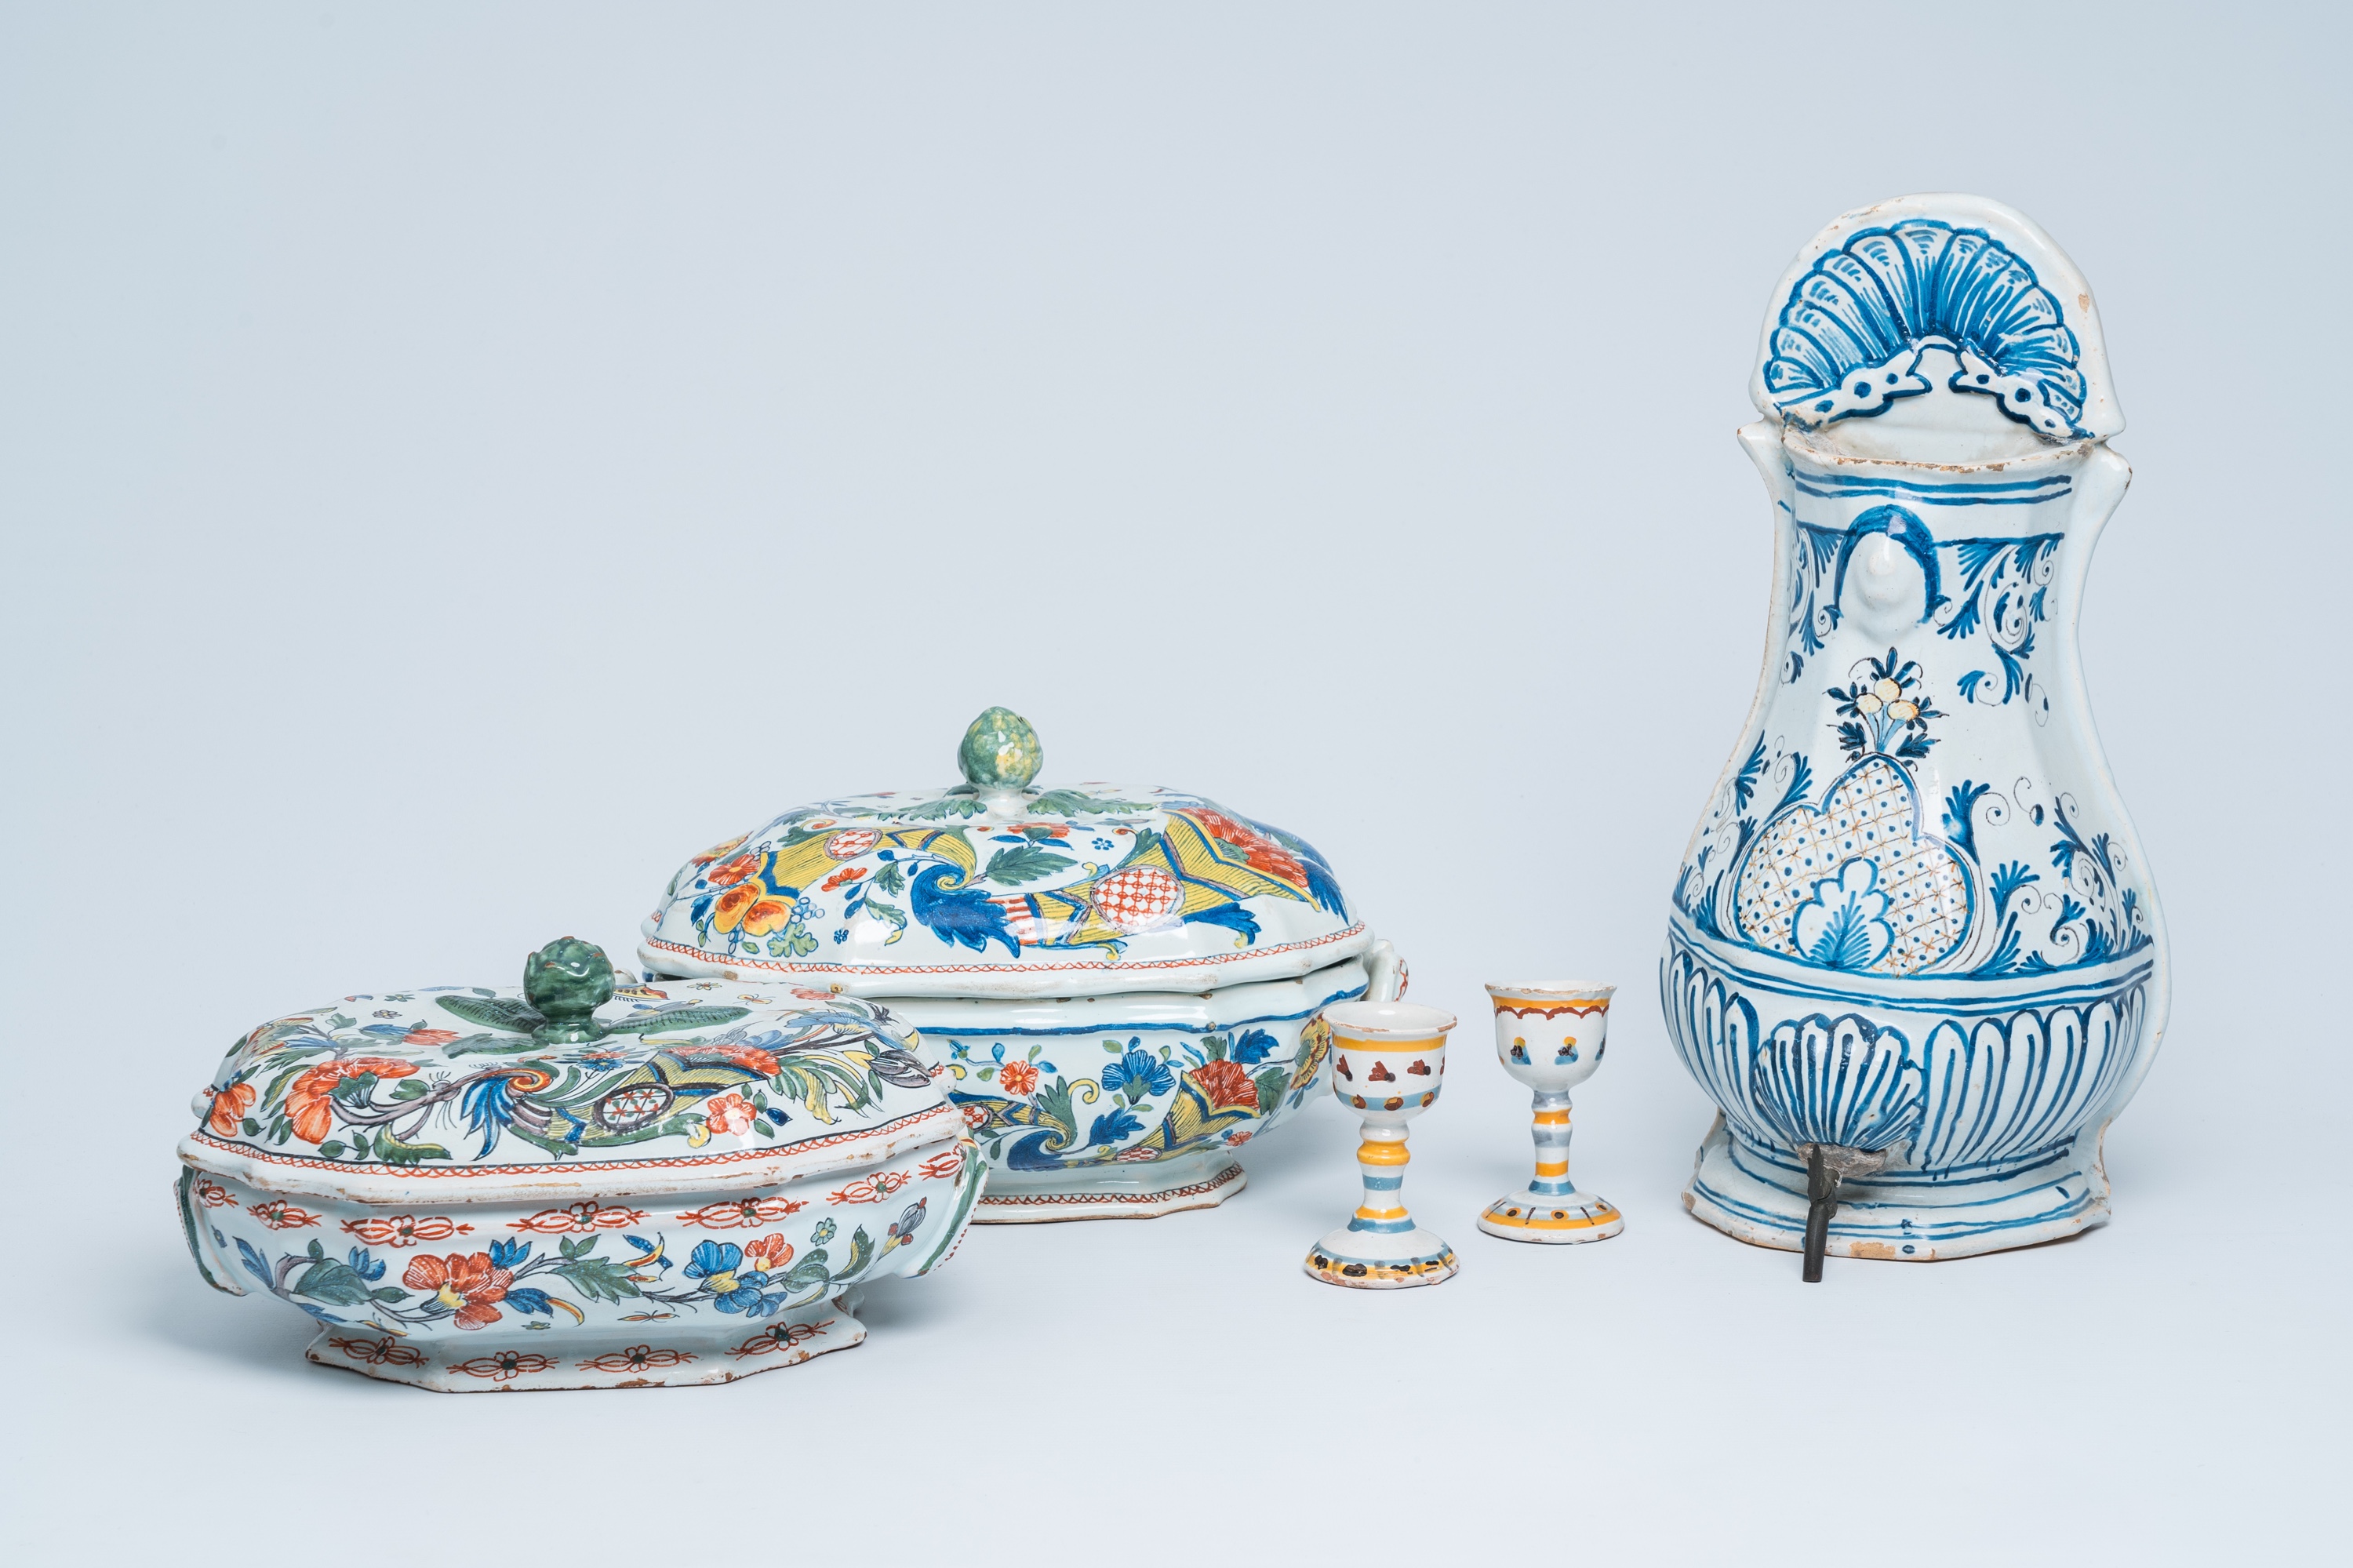 Two polychrome French Rouen faience tureens and covers, a pair of egg cups and a wall fountain, 18th